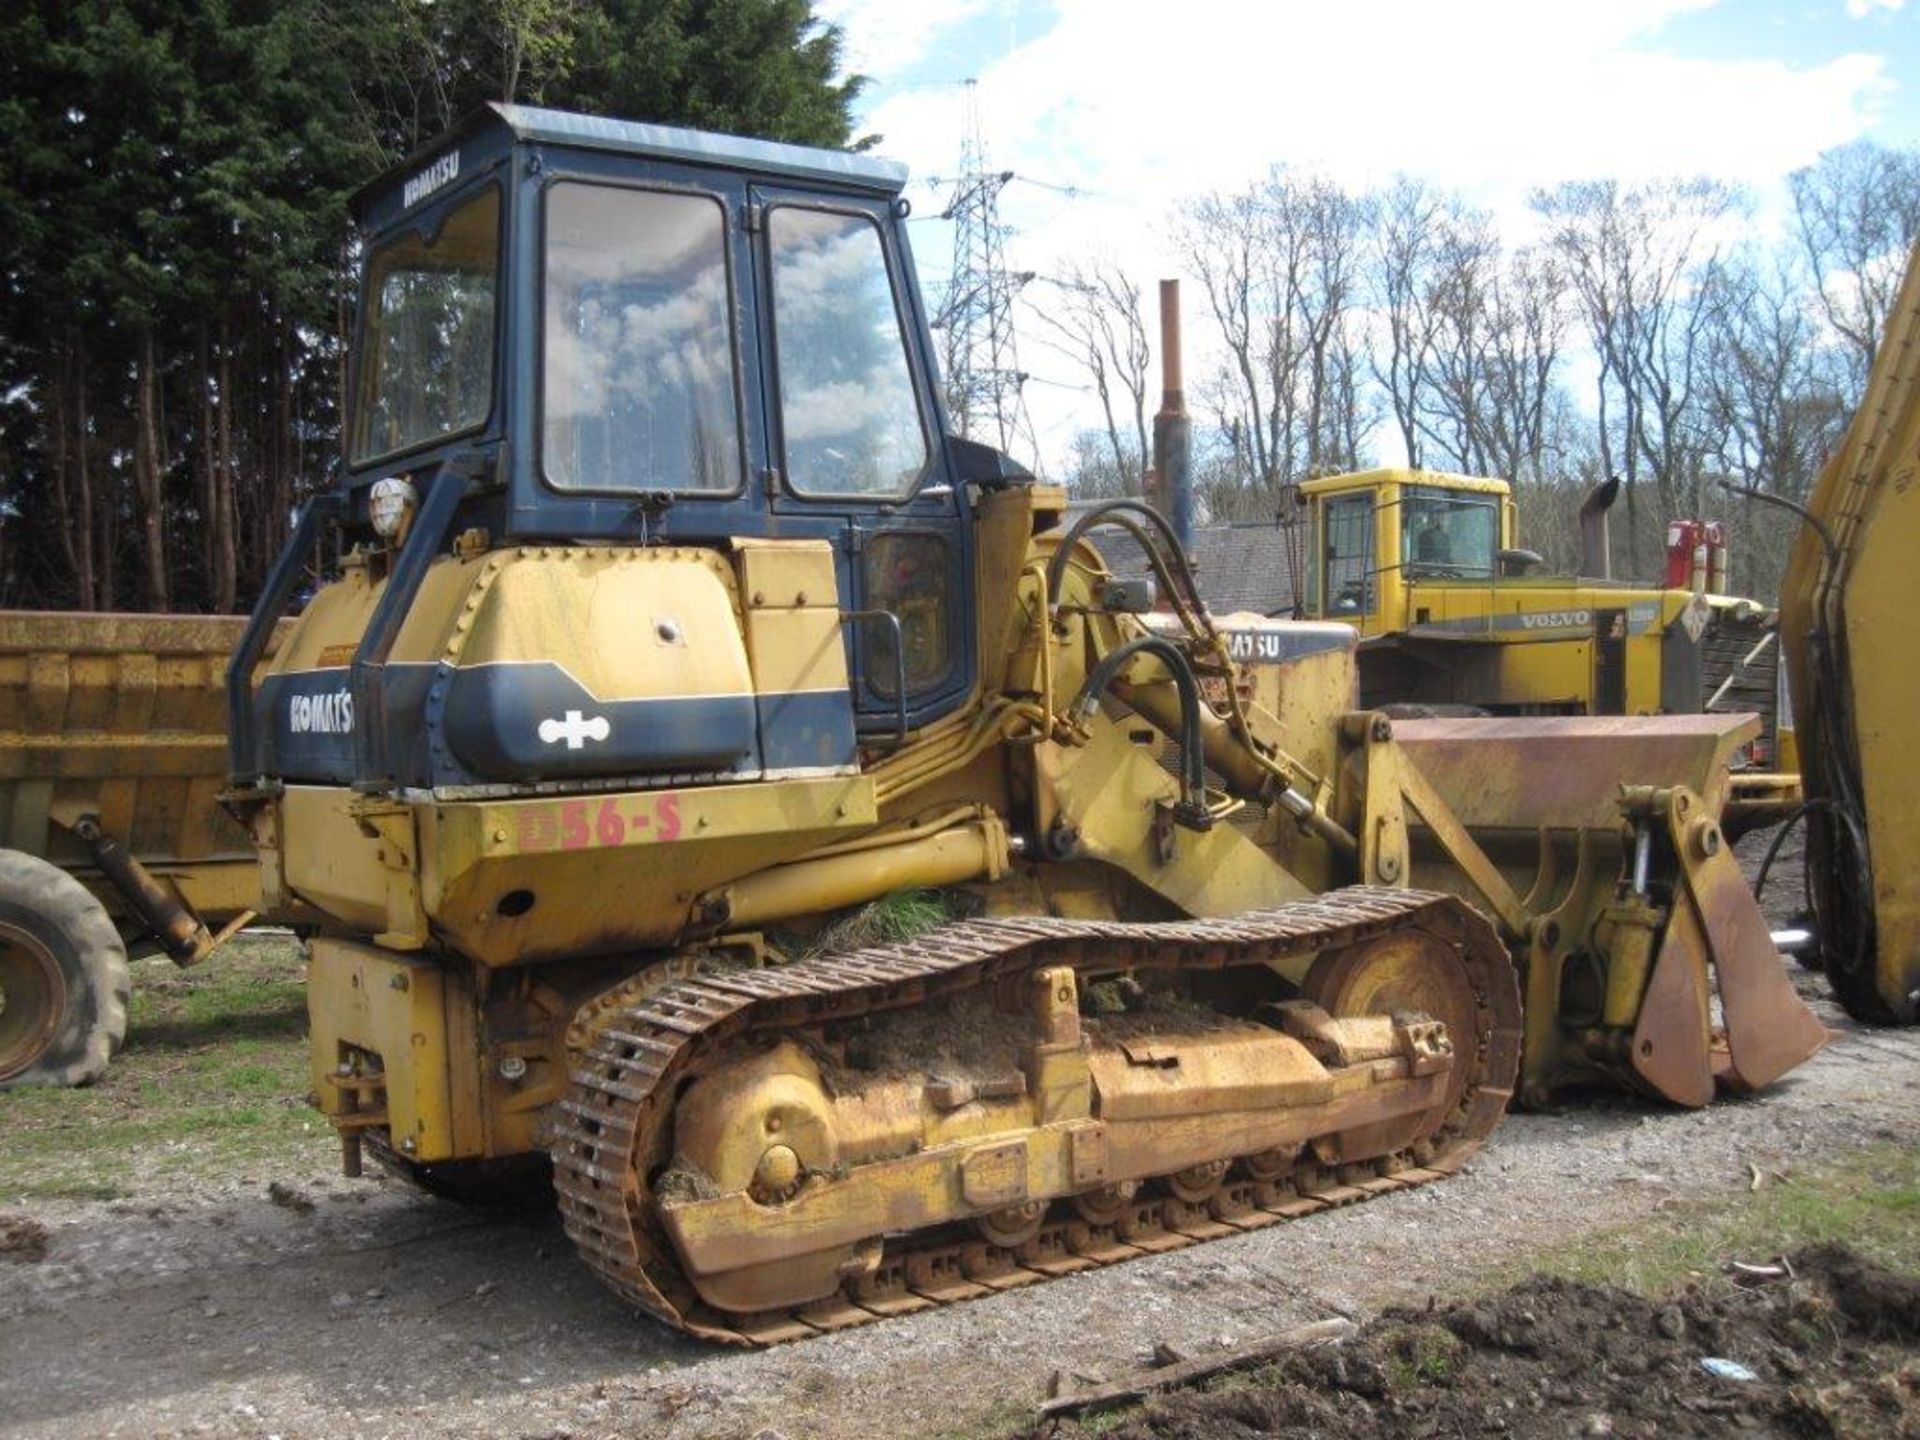 Komatsu Tracked Loading Shovel_x00D_
Good condition for age, 4 in 1 bucket with teeth and good - Image 2 of 6